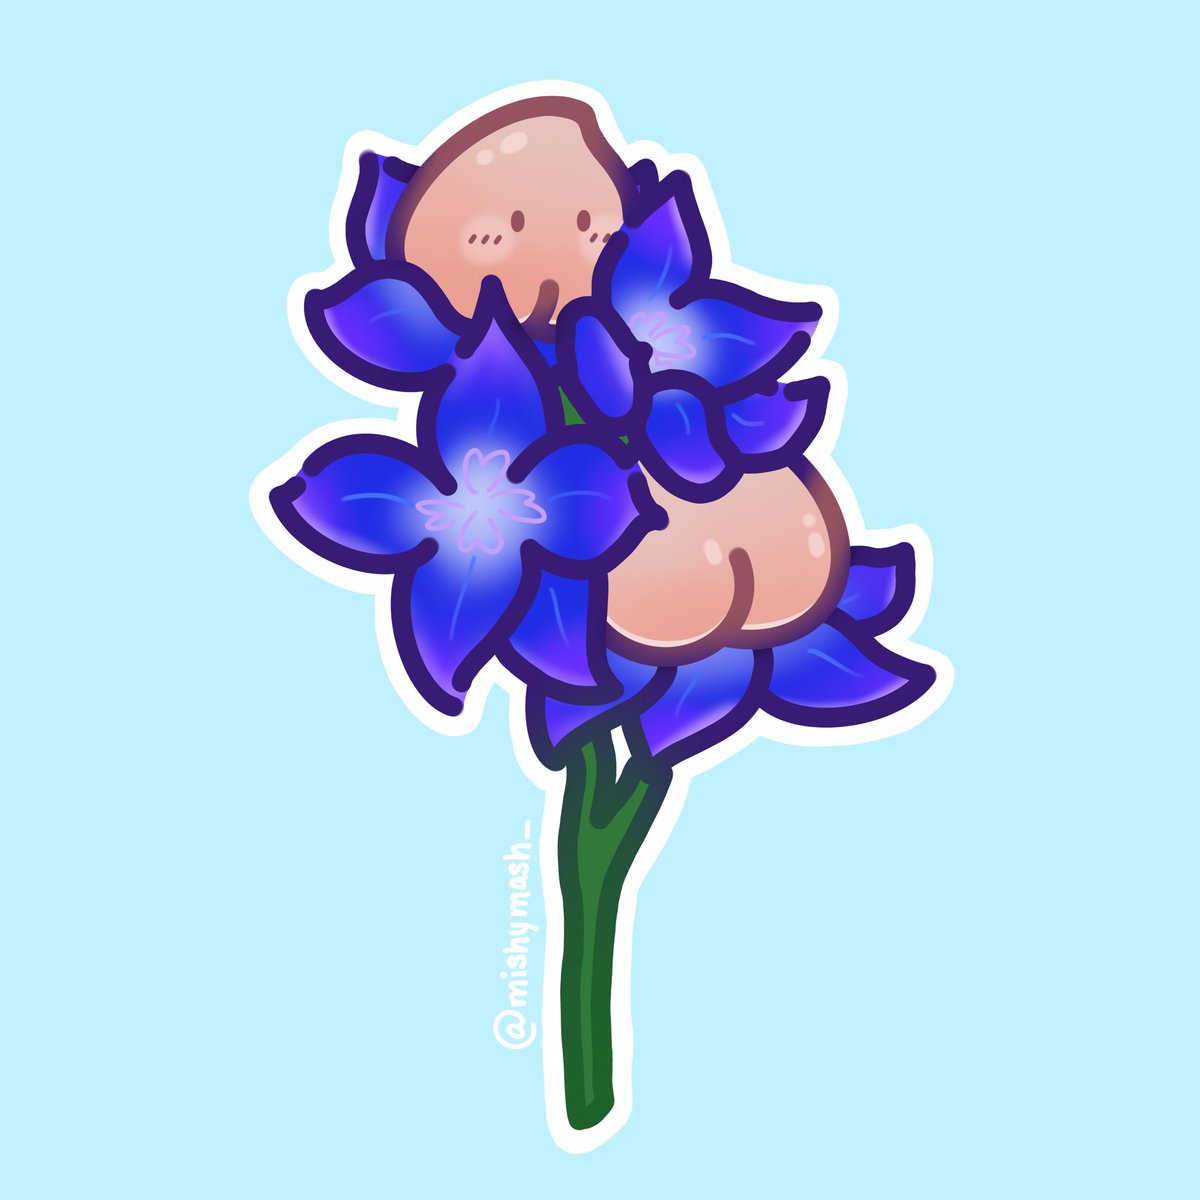 i love drawing my cute peaches :3 paired with larkspur flowers 🍑 

#art #artist #drawing #digital #digitalart #peach #peaches #cute #cutepeaches #flowers #flowerart #procreate #procreateart #sticker